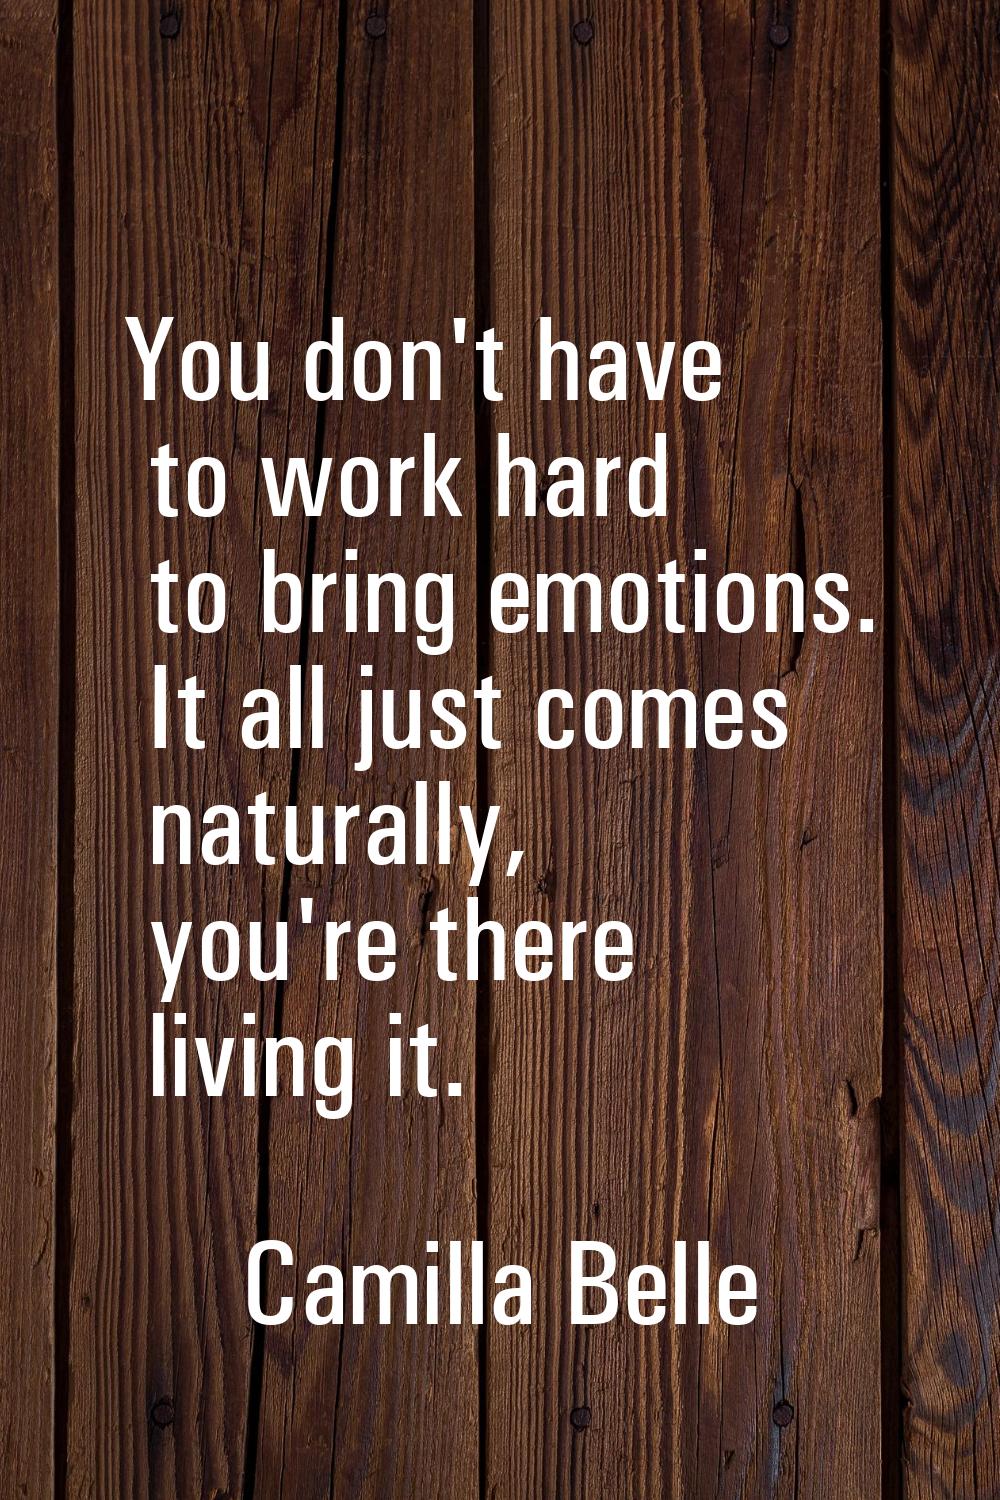 You don't have to work hard to bring emotions. It all just comes naturally, you're there living it.